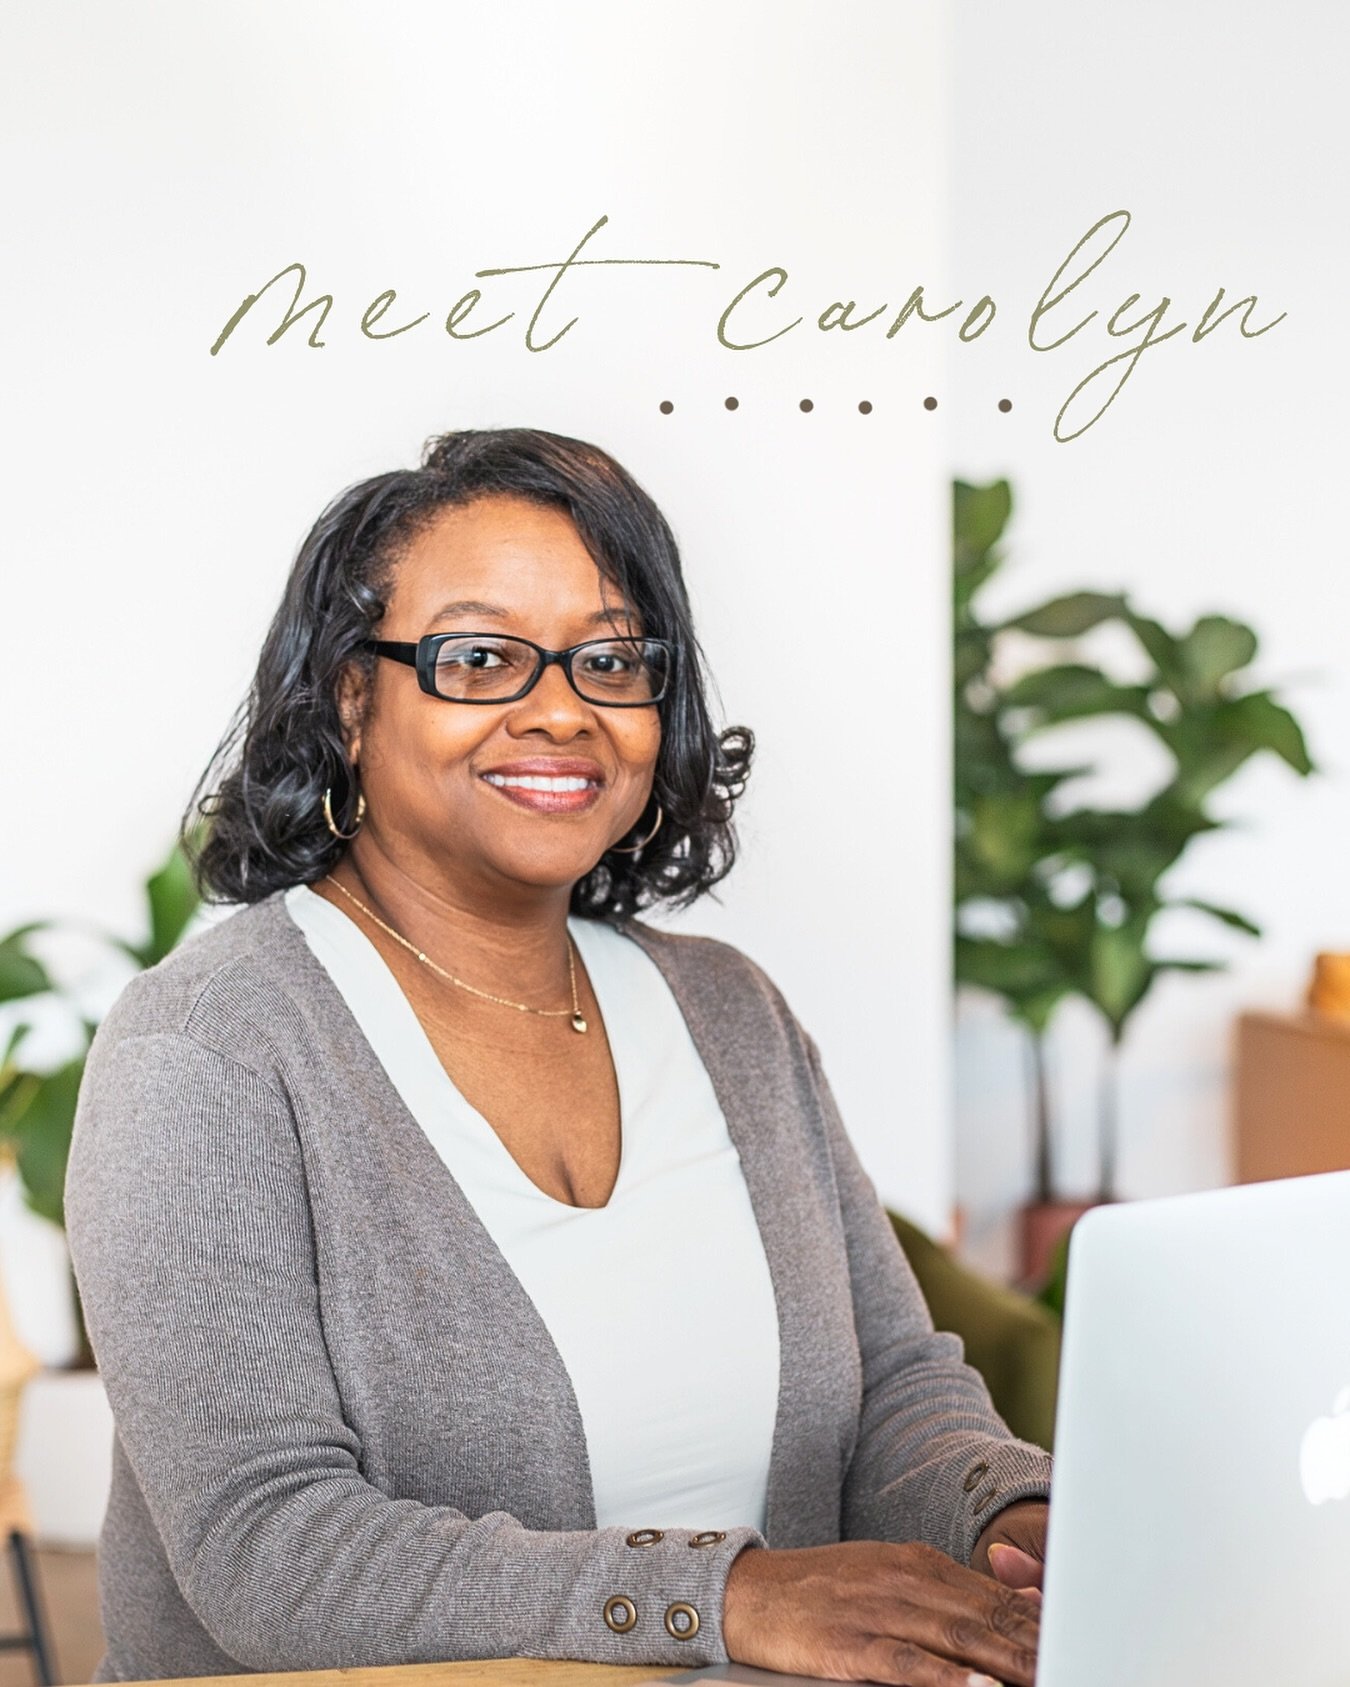 It&rsquo;s official!! 

Our very own, Carolyn, is now a therapist on the team and accepting new clients! 🥳

After a long career in computer technology, Carolyn felt a calling to switch career paths and follow her heart in helping people as a mental 